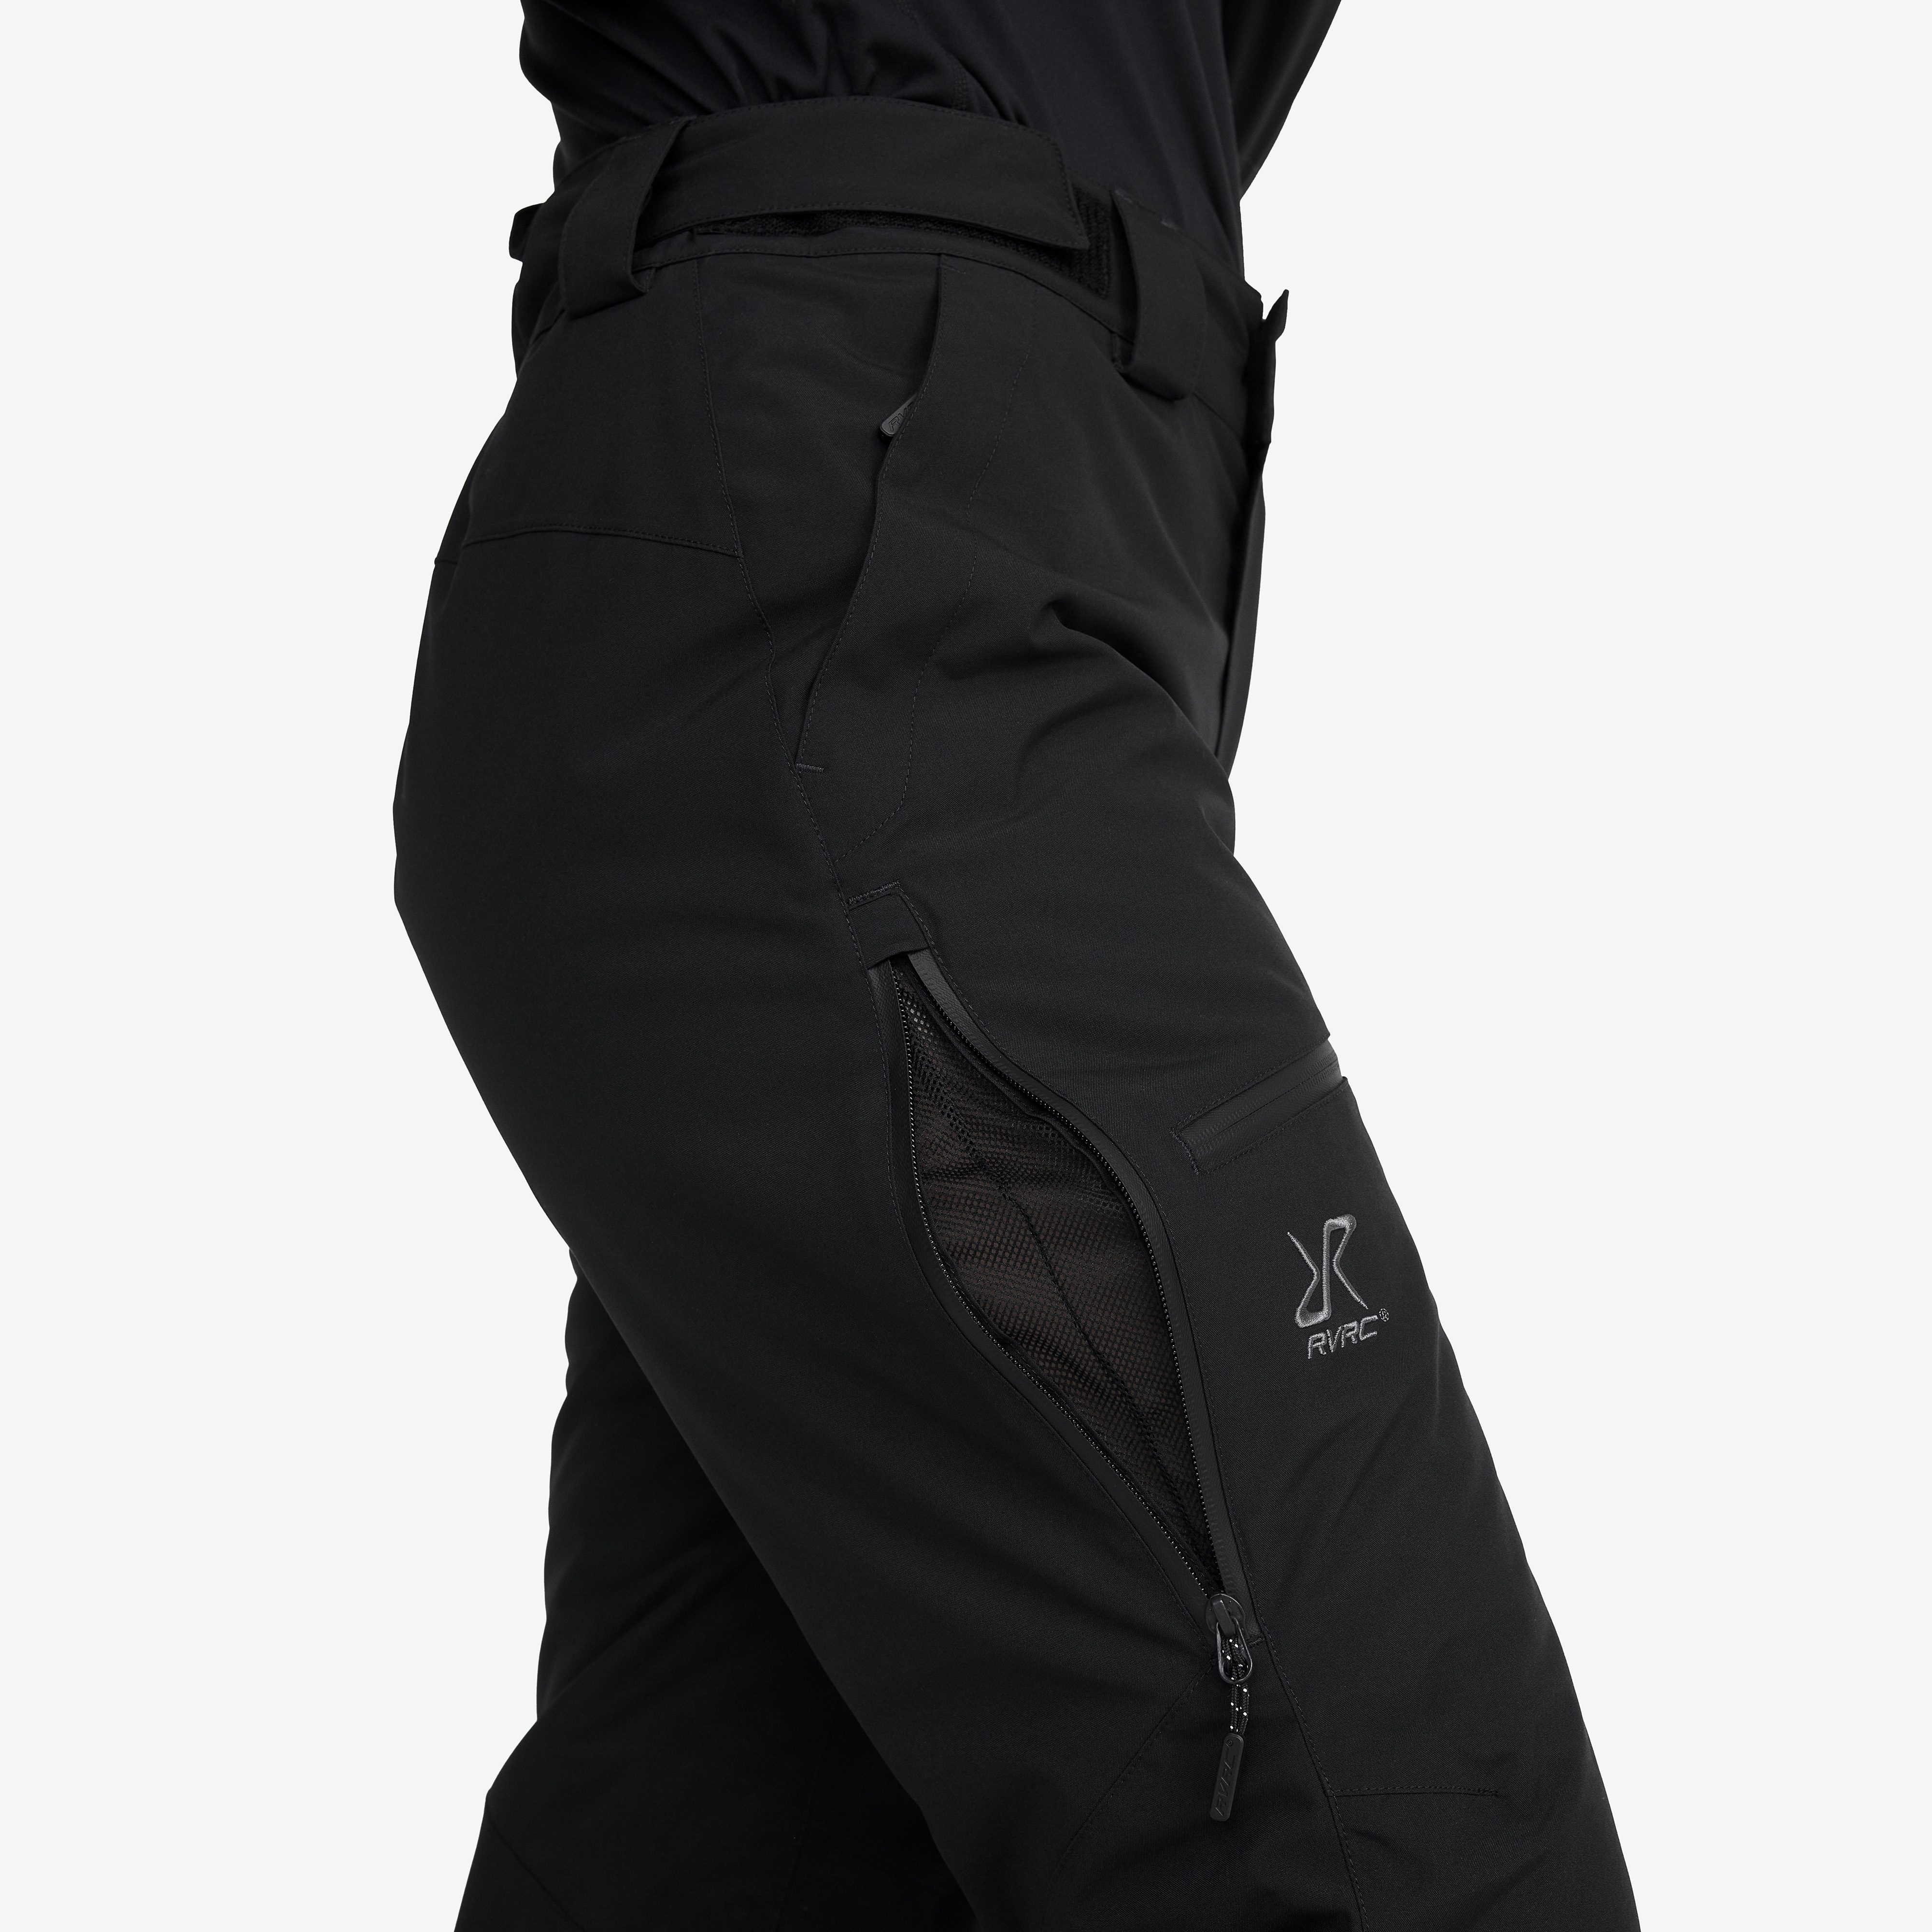 Halo 2L Insulated Ski Pants Women Anthracite